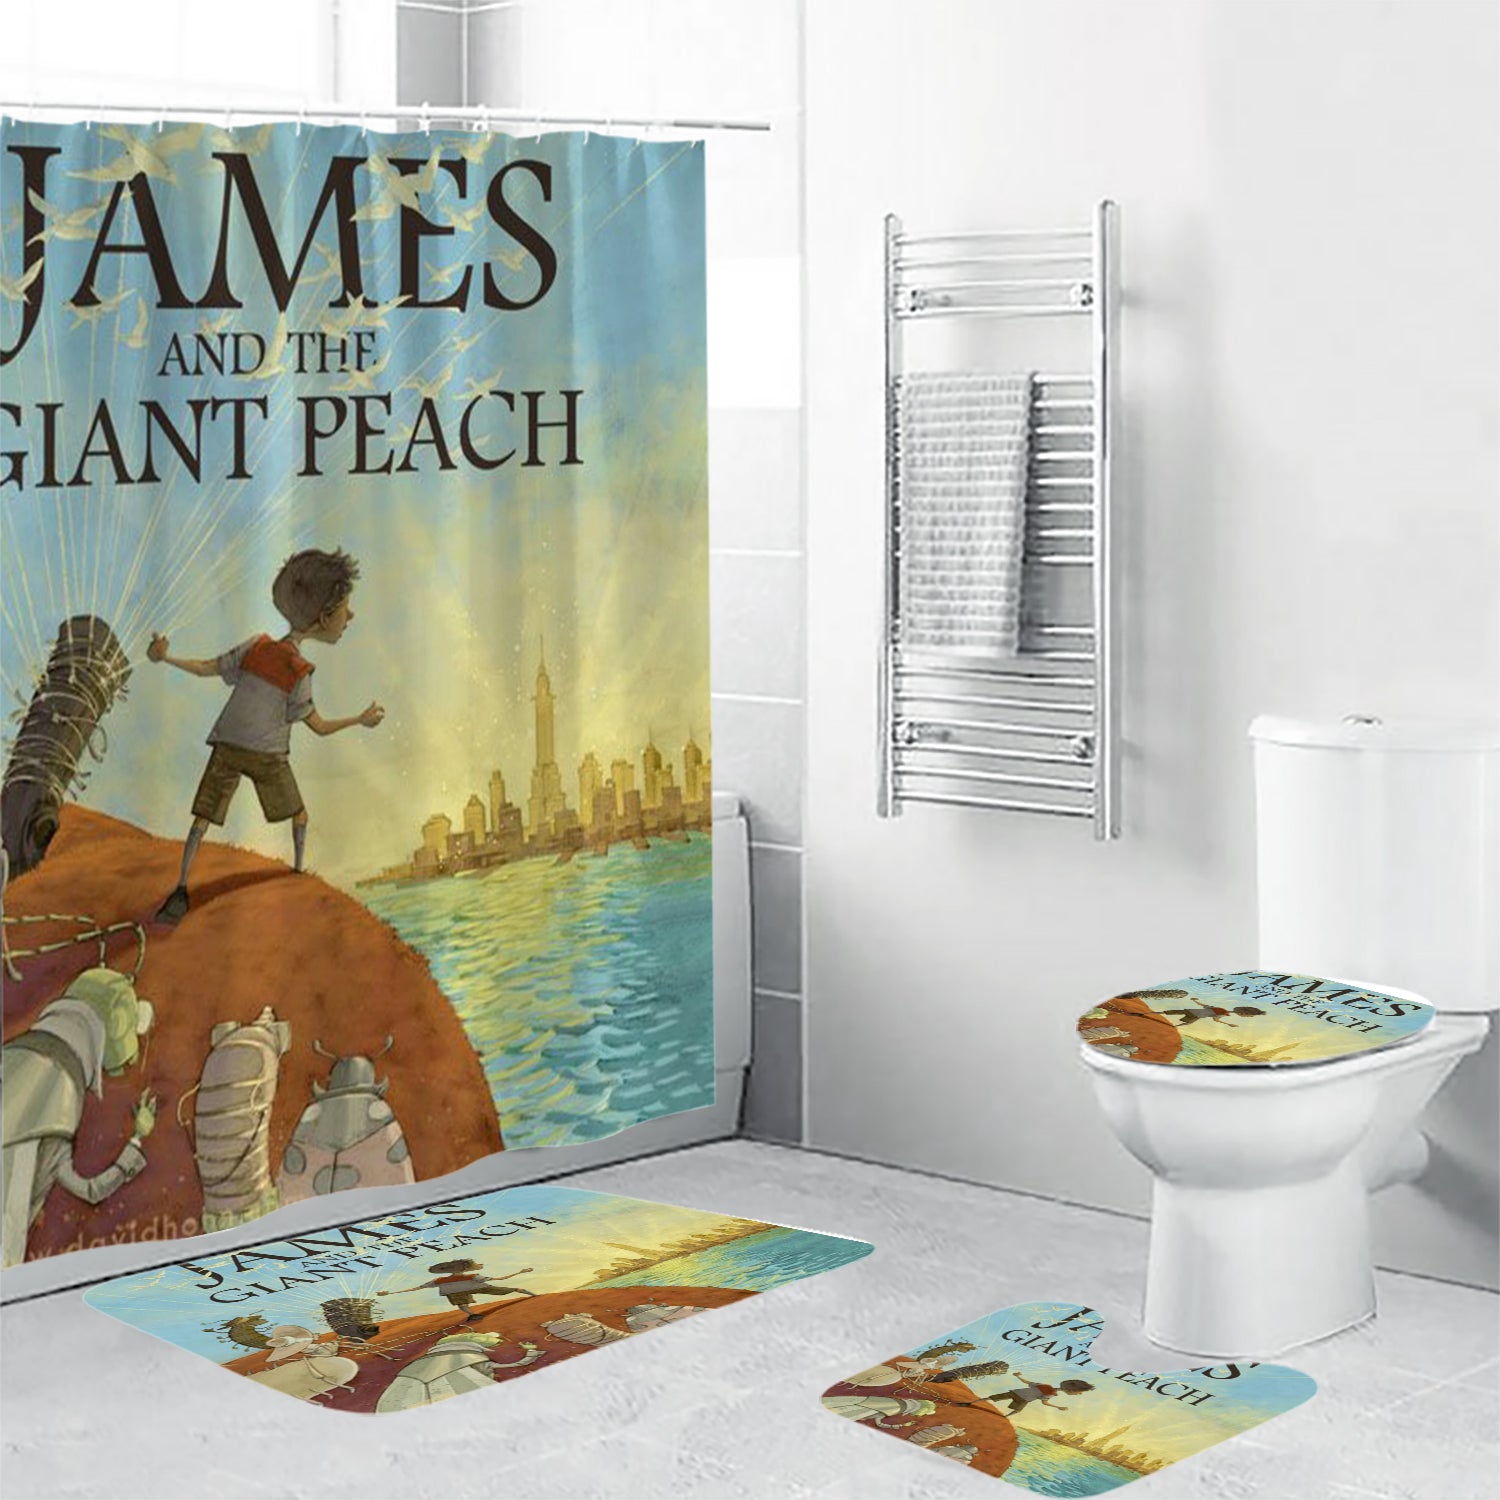 James and the Giant Peach Poster 5 4PCS Shower Curtain Non-Slip Toilet Lid Cover Bath Mat - Bathroom Set Fans Gifts